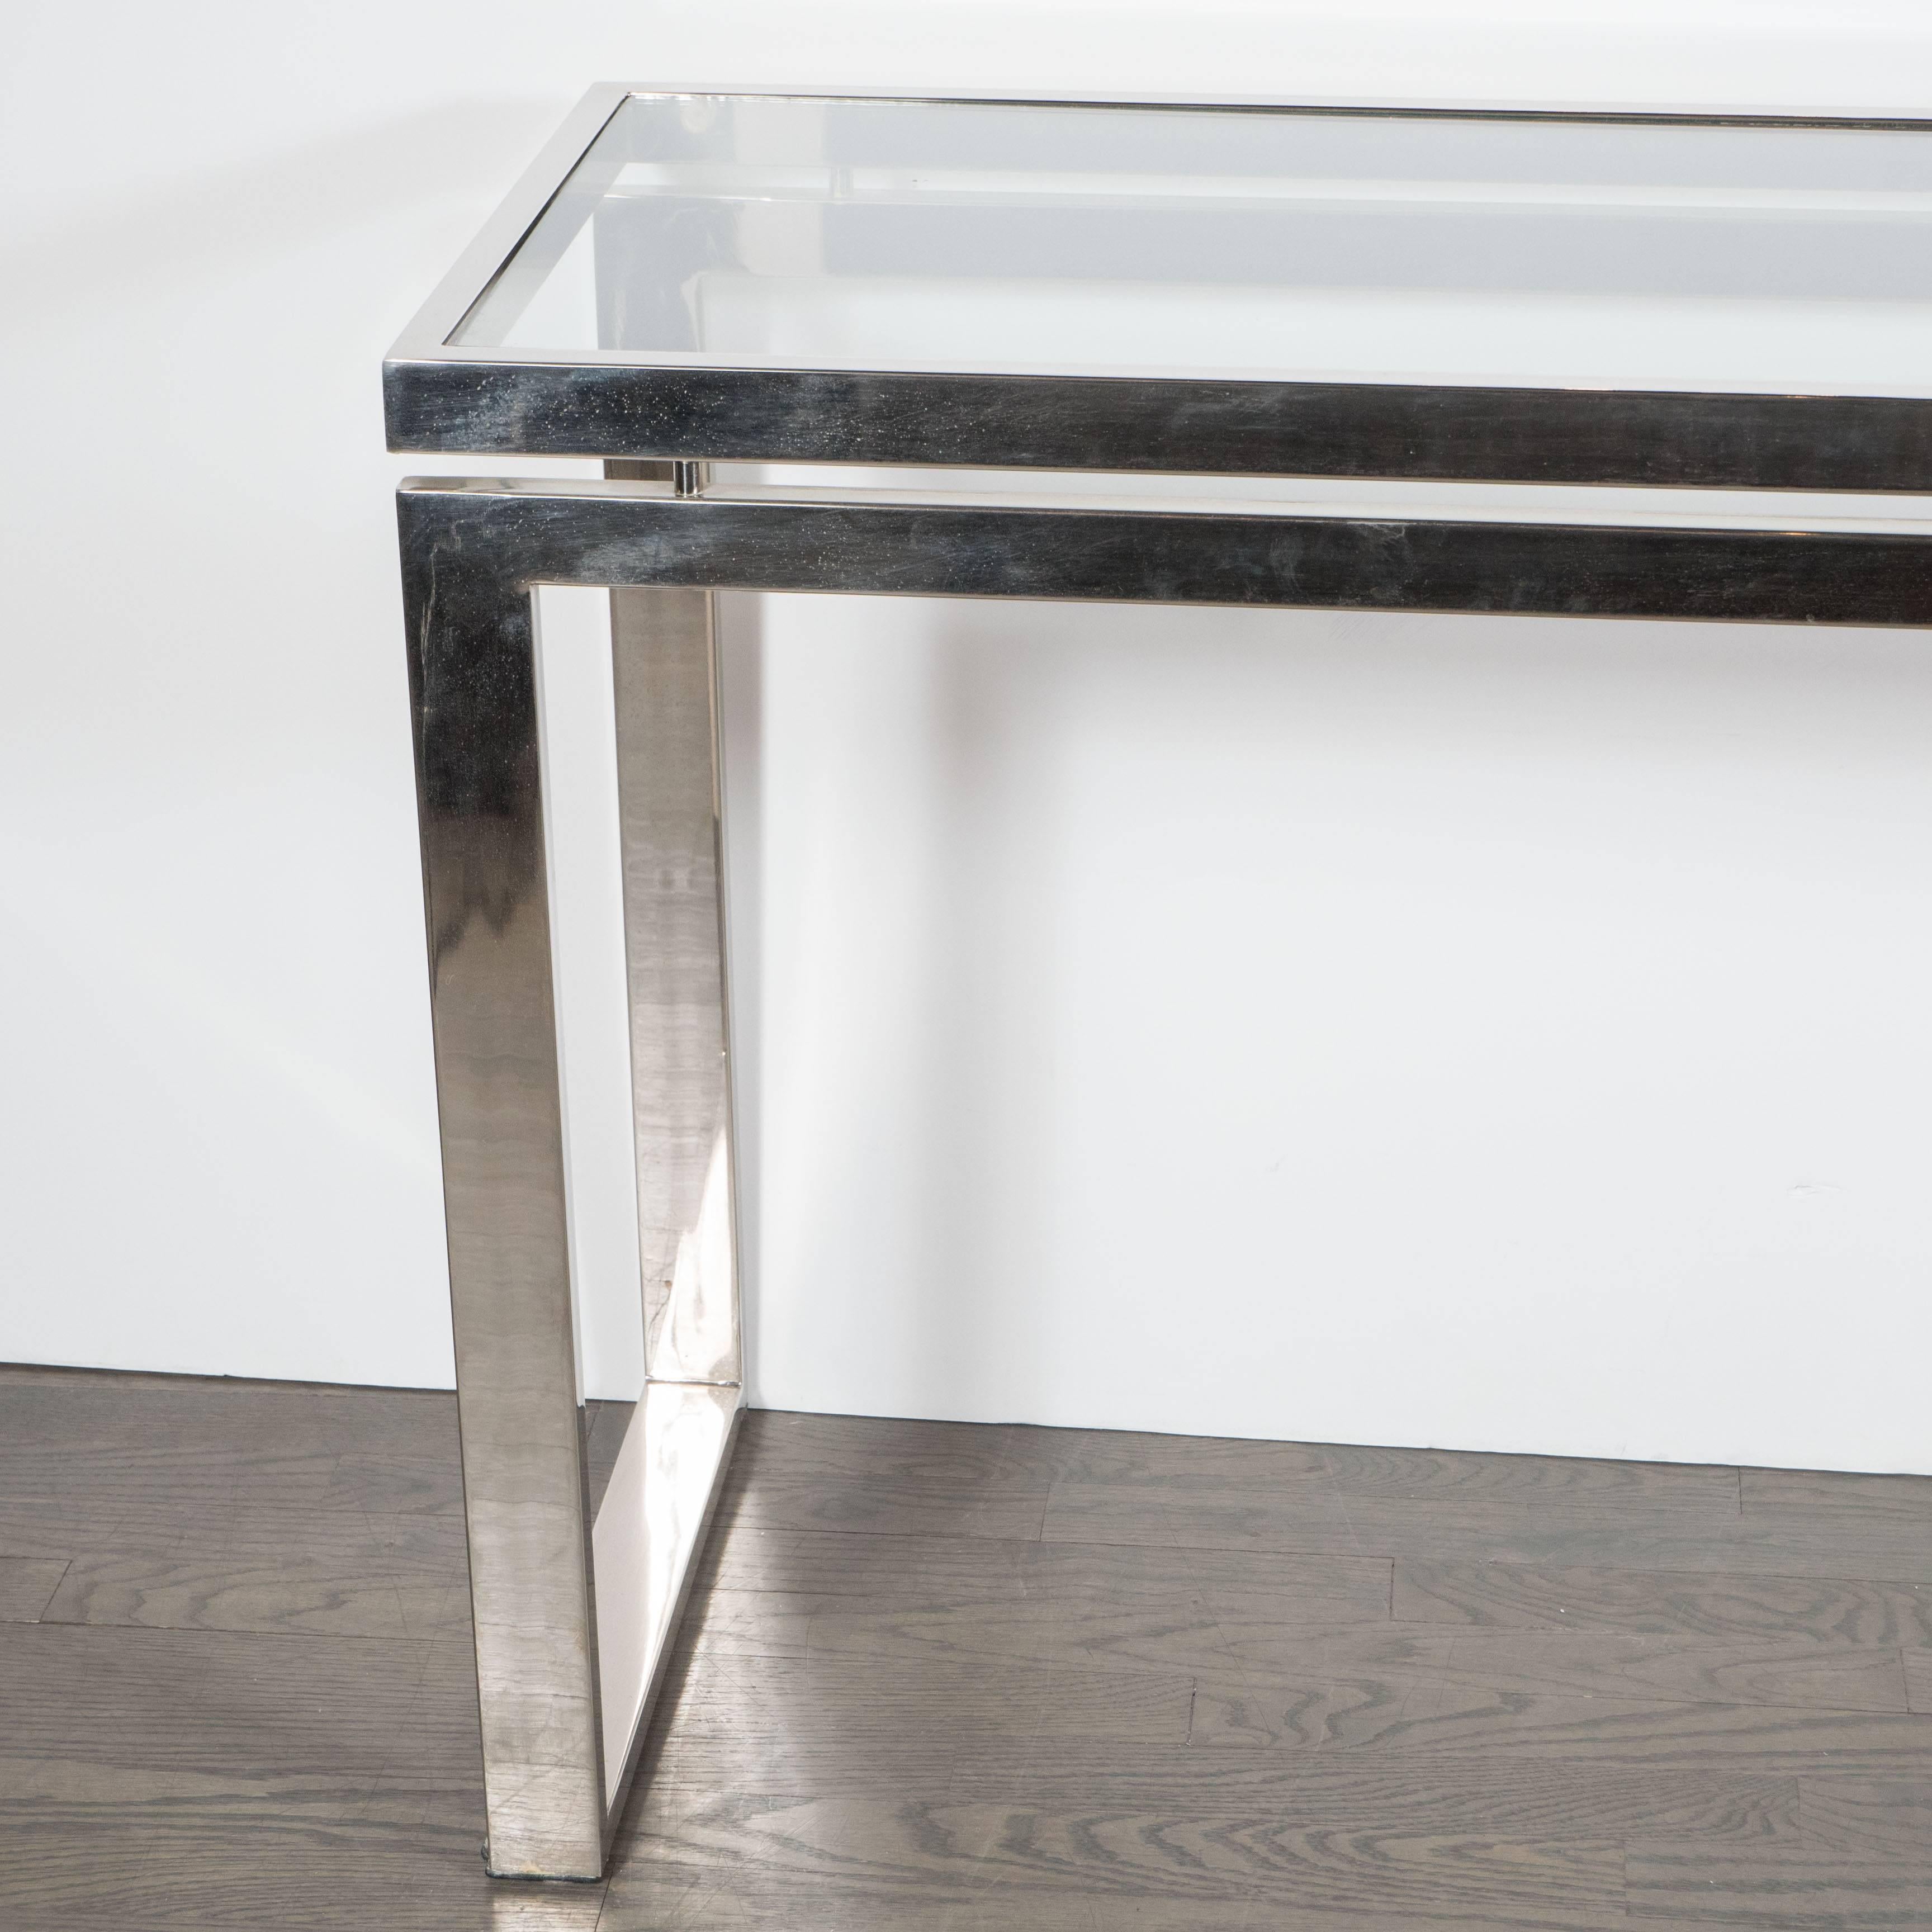 Late 20th Century Mid-Century Modernist Chrome and Glass Console or Sofa Table by Milo Baughman